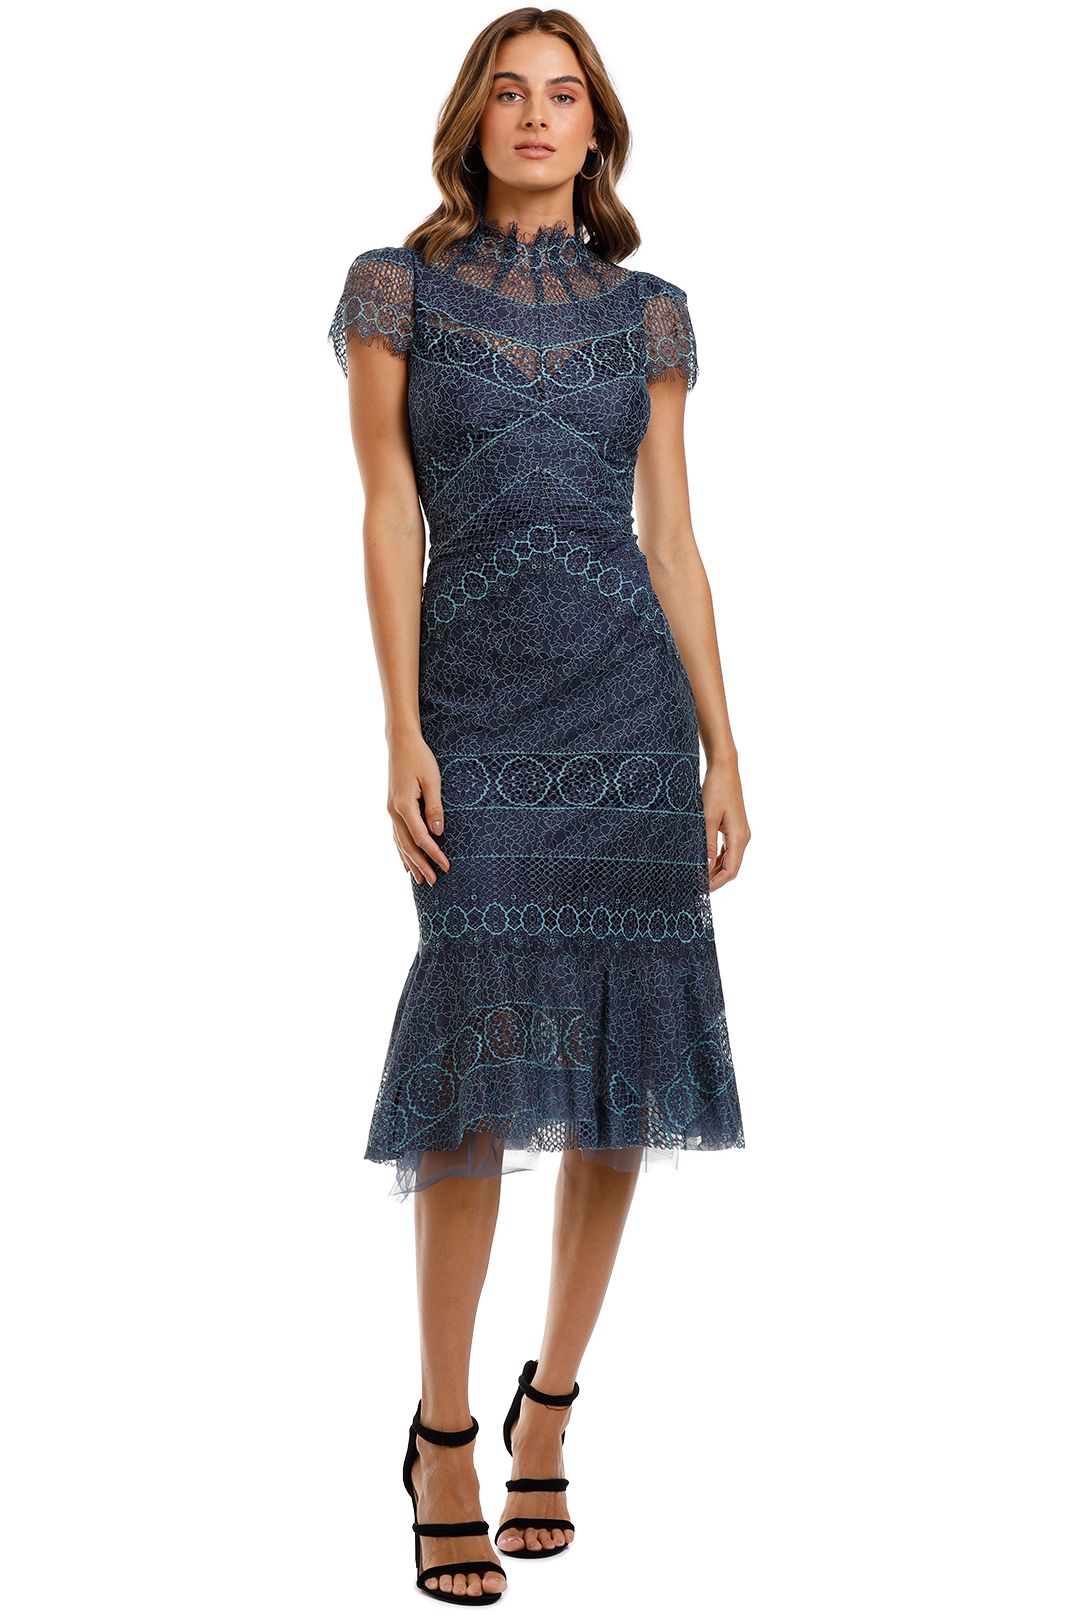 Moss and Spy Riviera High Neck Dress Navy Tulle